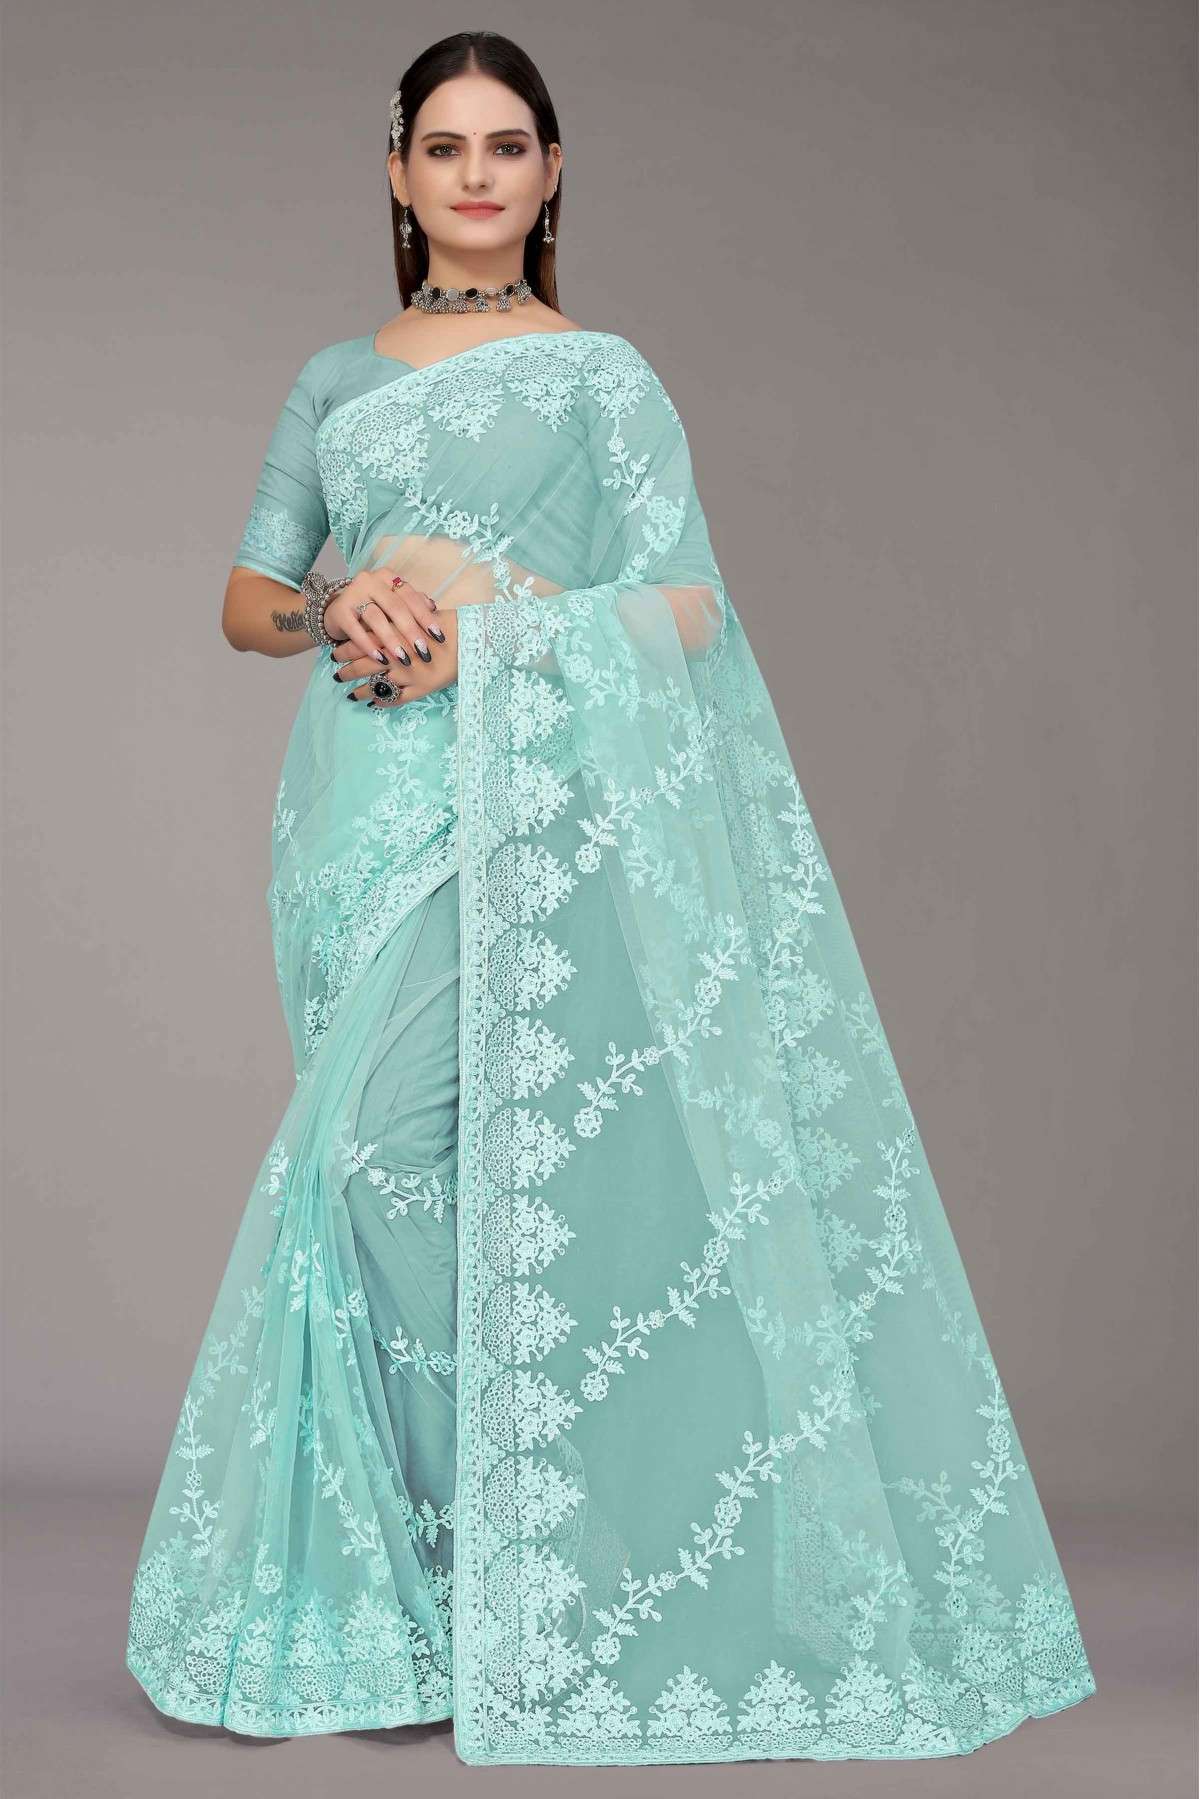 Net Embroidery Saree In Light Green Colour - SR5416227